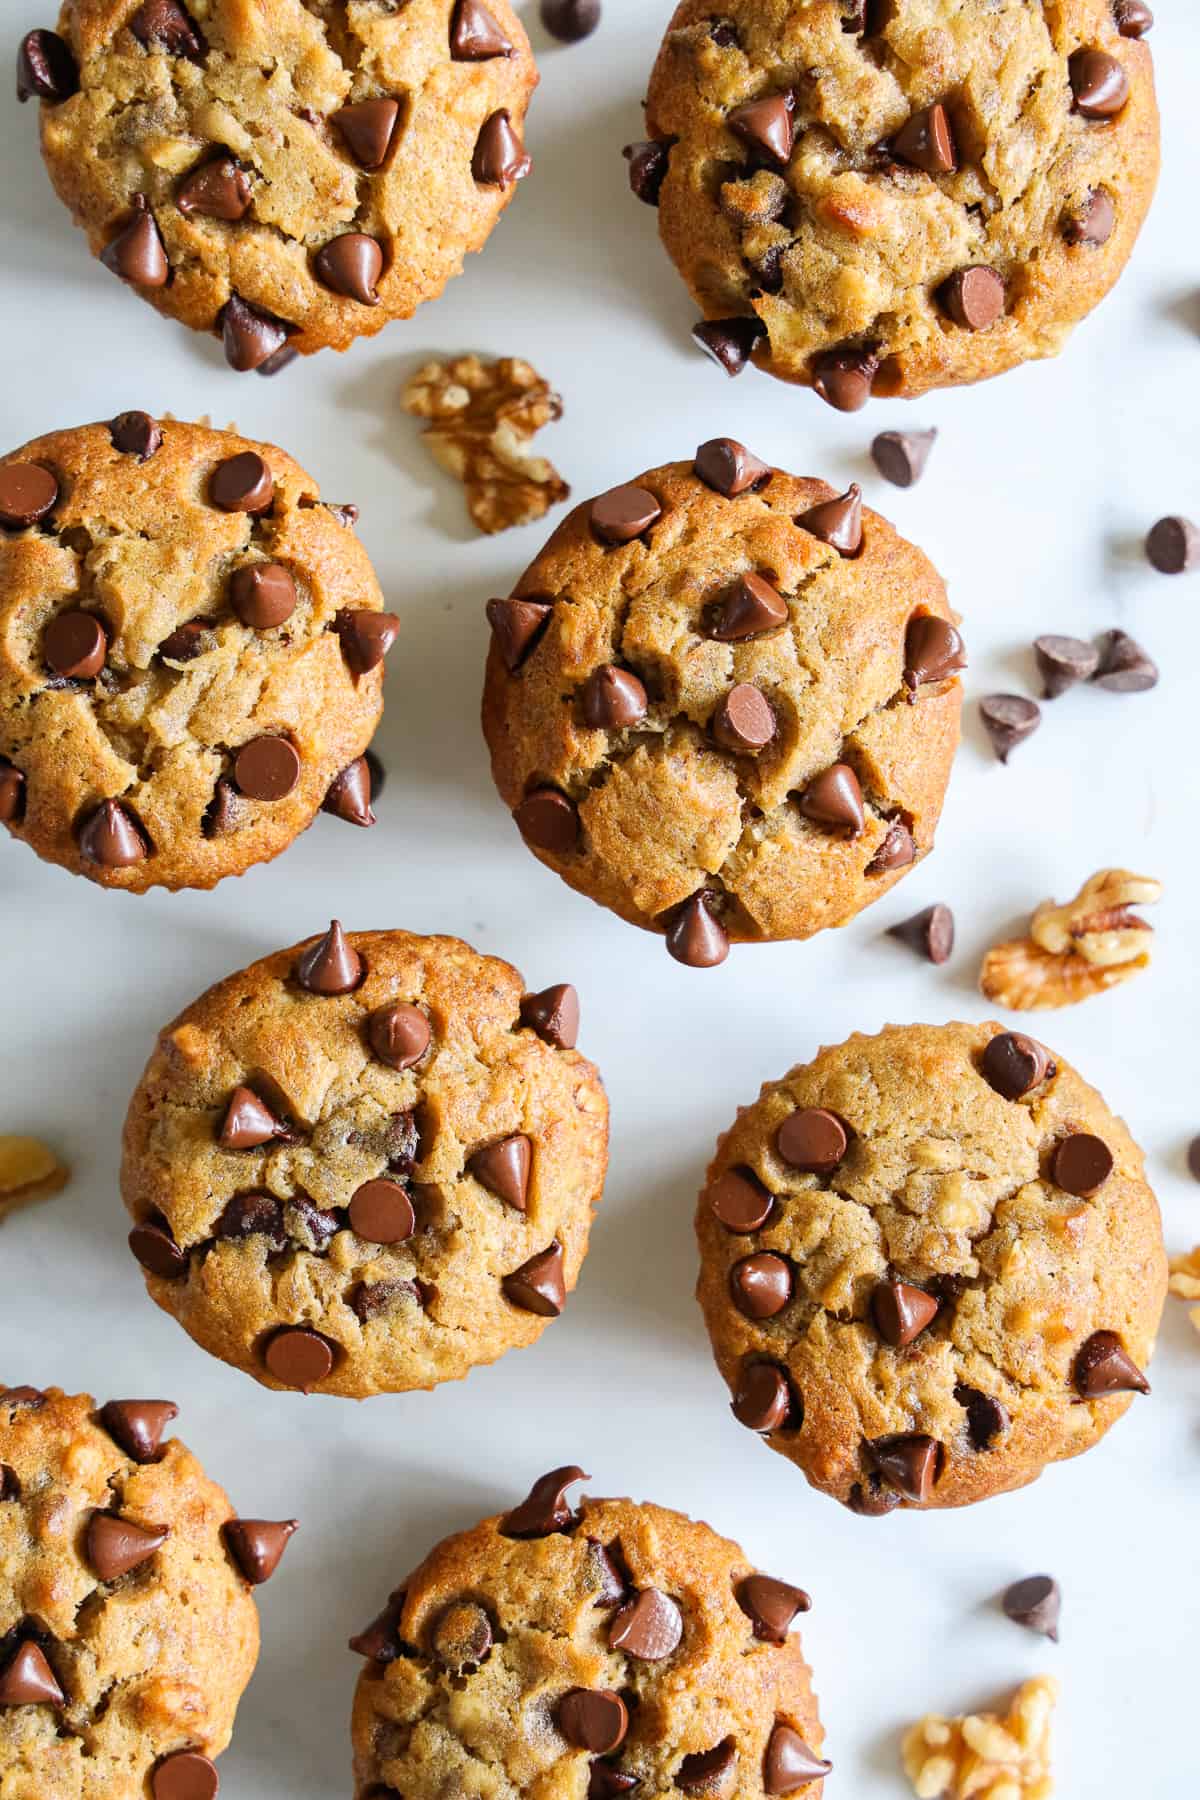 Overhead view of Banana Chocolate Chip Muffins with chocolate chips and walnuts scattered around them.